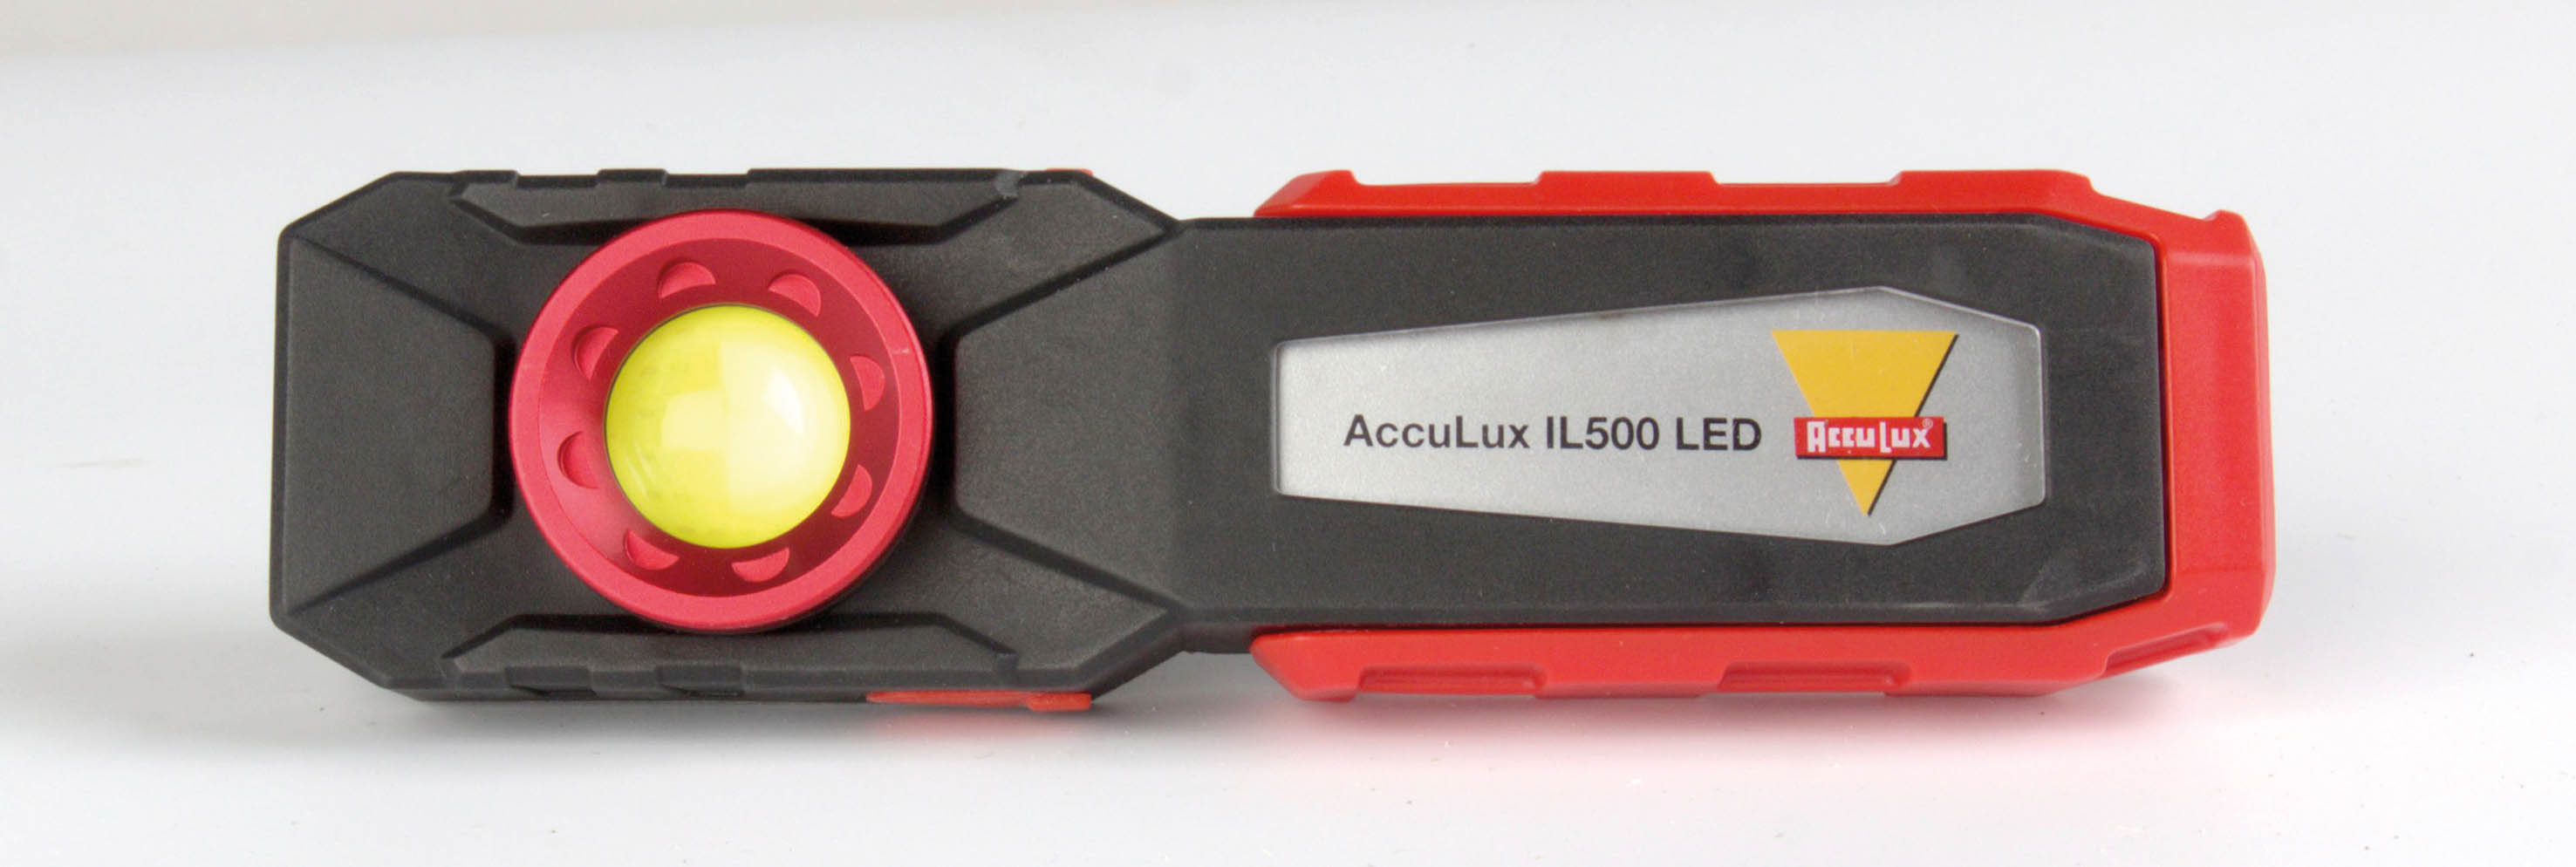 Acculux Acculux